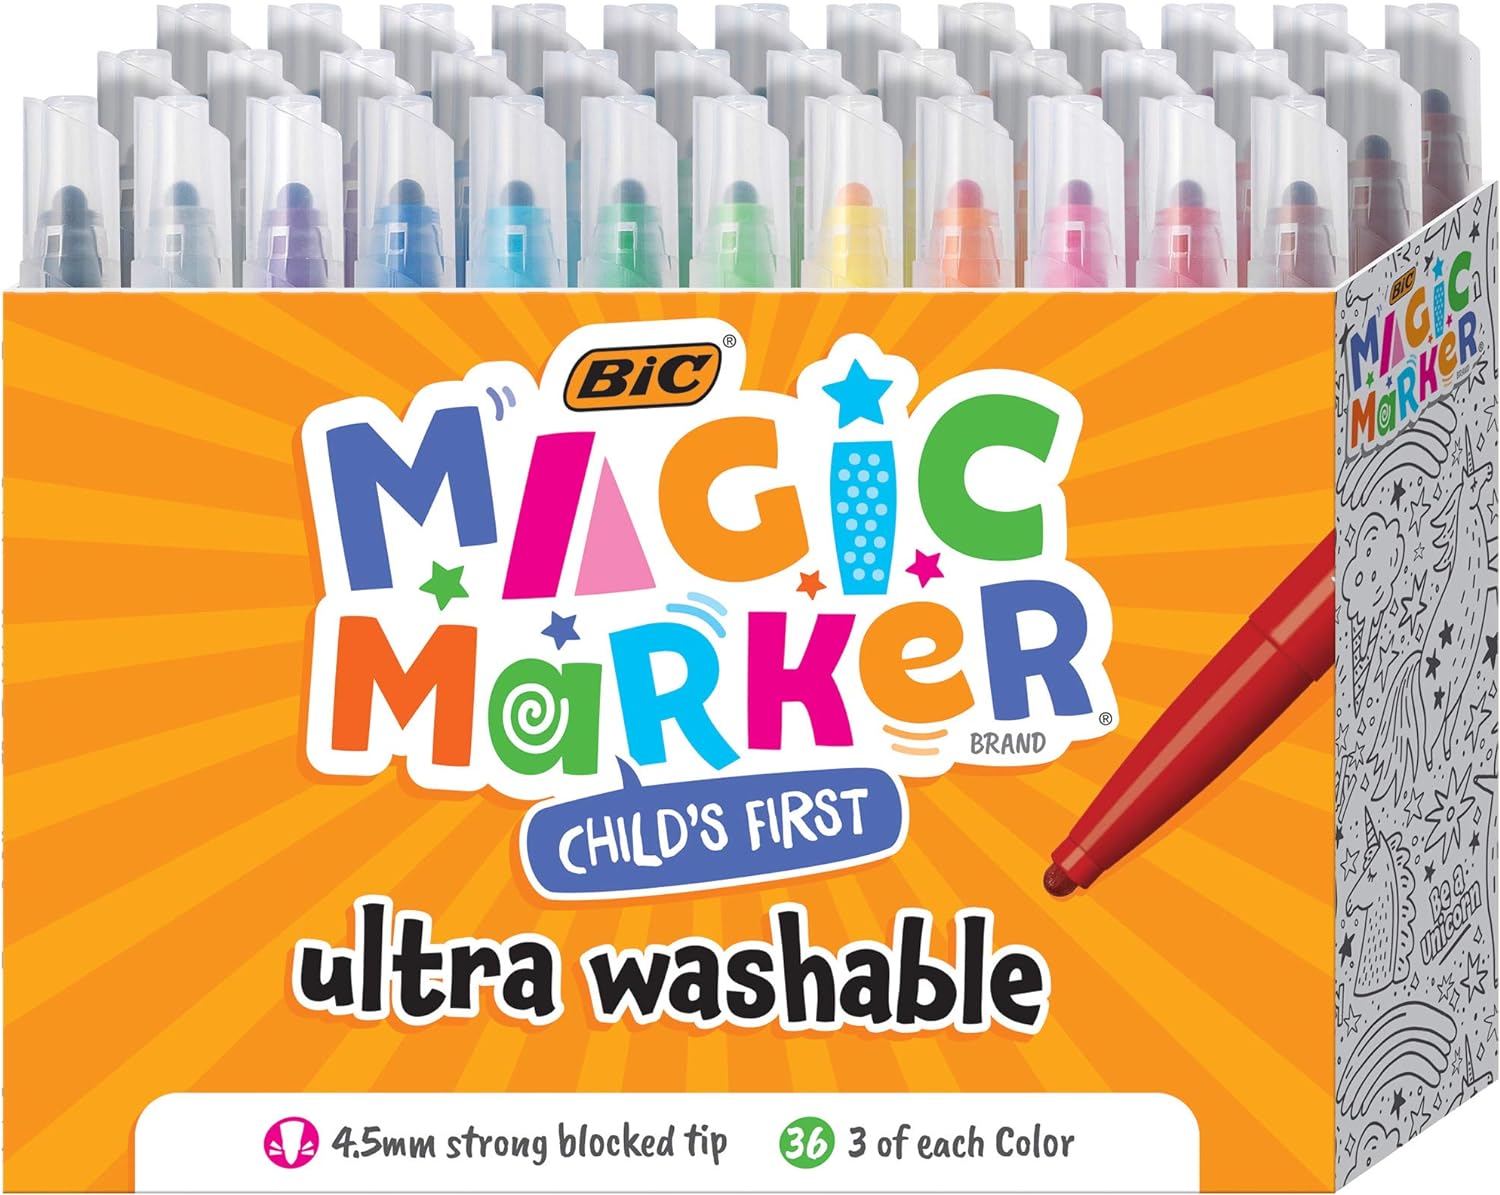 These are my favorites and i love them so so much better than crayola! Do yourself a favor and buy these. They color so well and dont dry out for days if caps are accidentally forgotten! All the caps are clear so the kids can put any cap on any marker and that is so so underrated and wonderful! They are super washable as well, out of clothes, walls, skin you name it it washes out no problem, no scrubbing! I mean for a marker what more could you even ask for (other than more colors)!